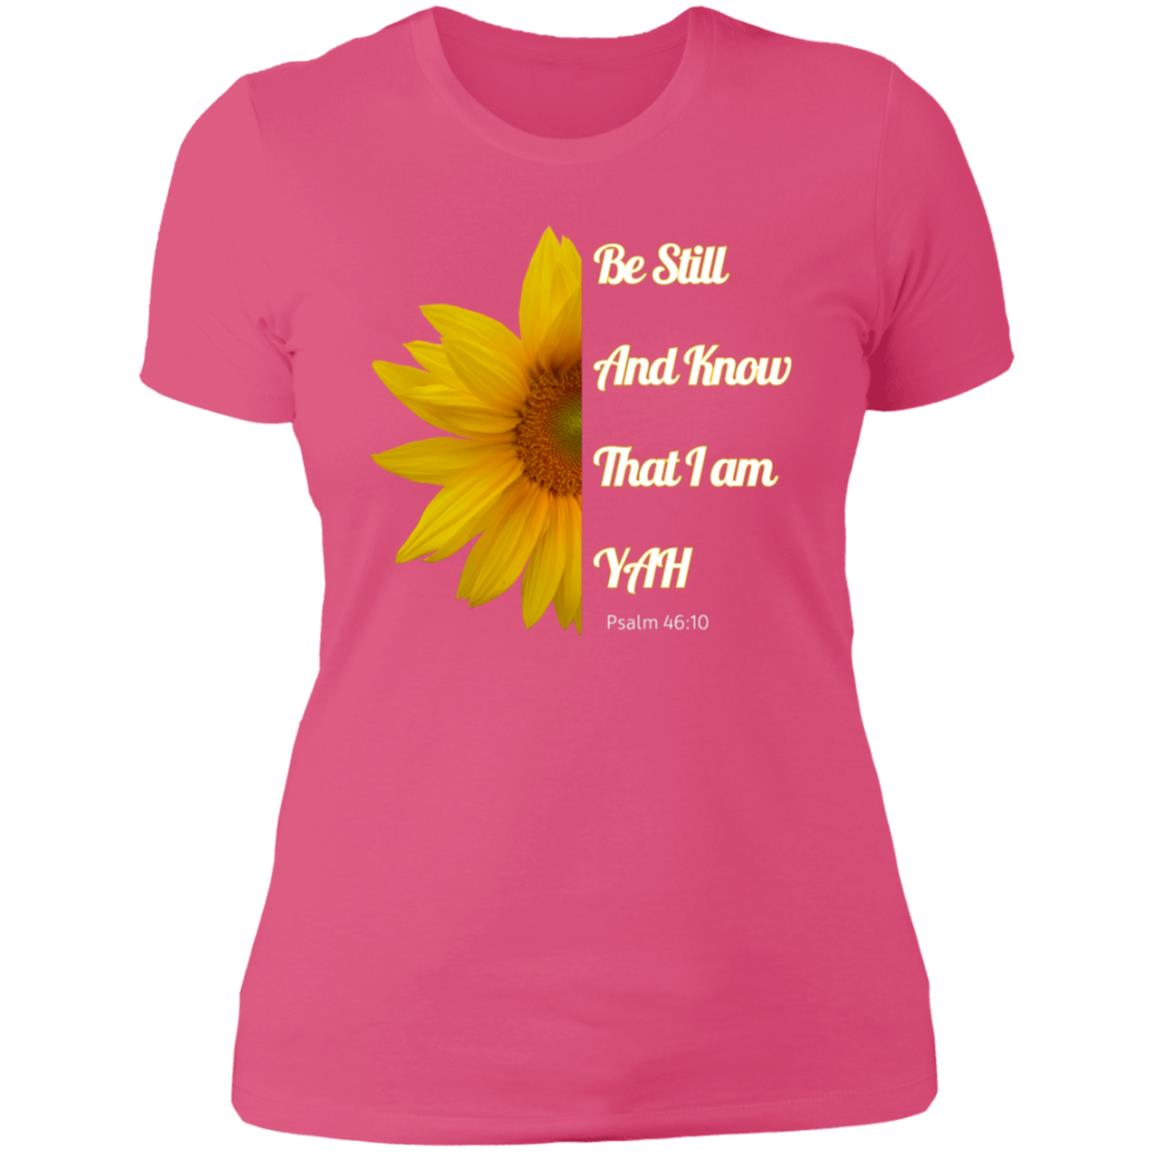 Be Still and Know Ladies' Slim Fit T-Shirt